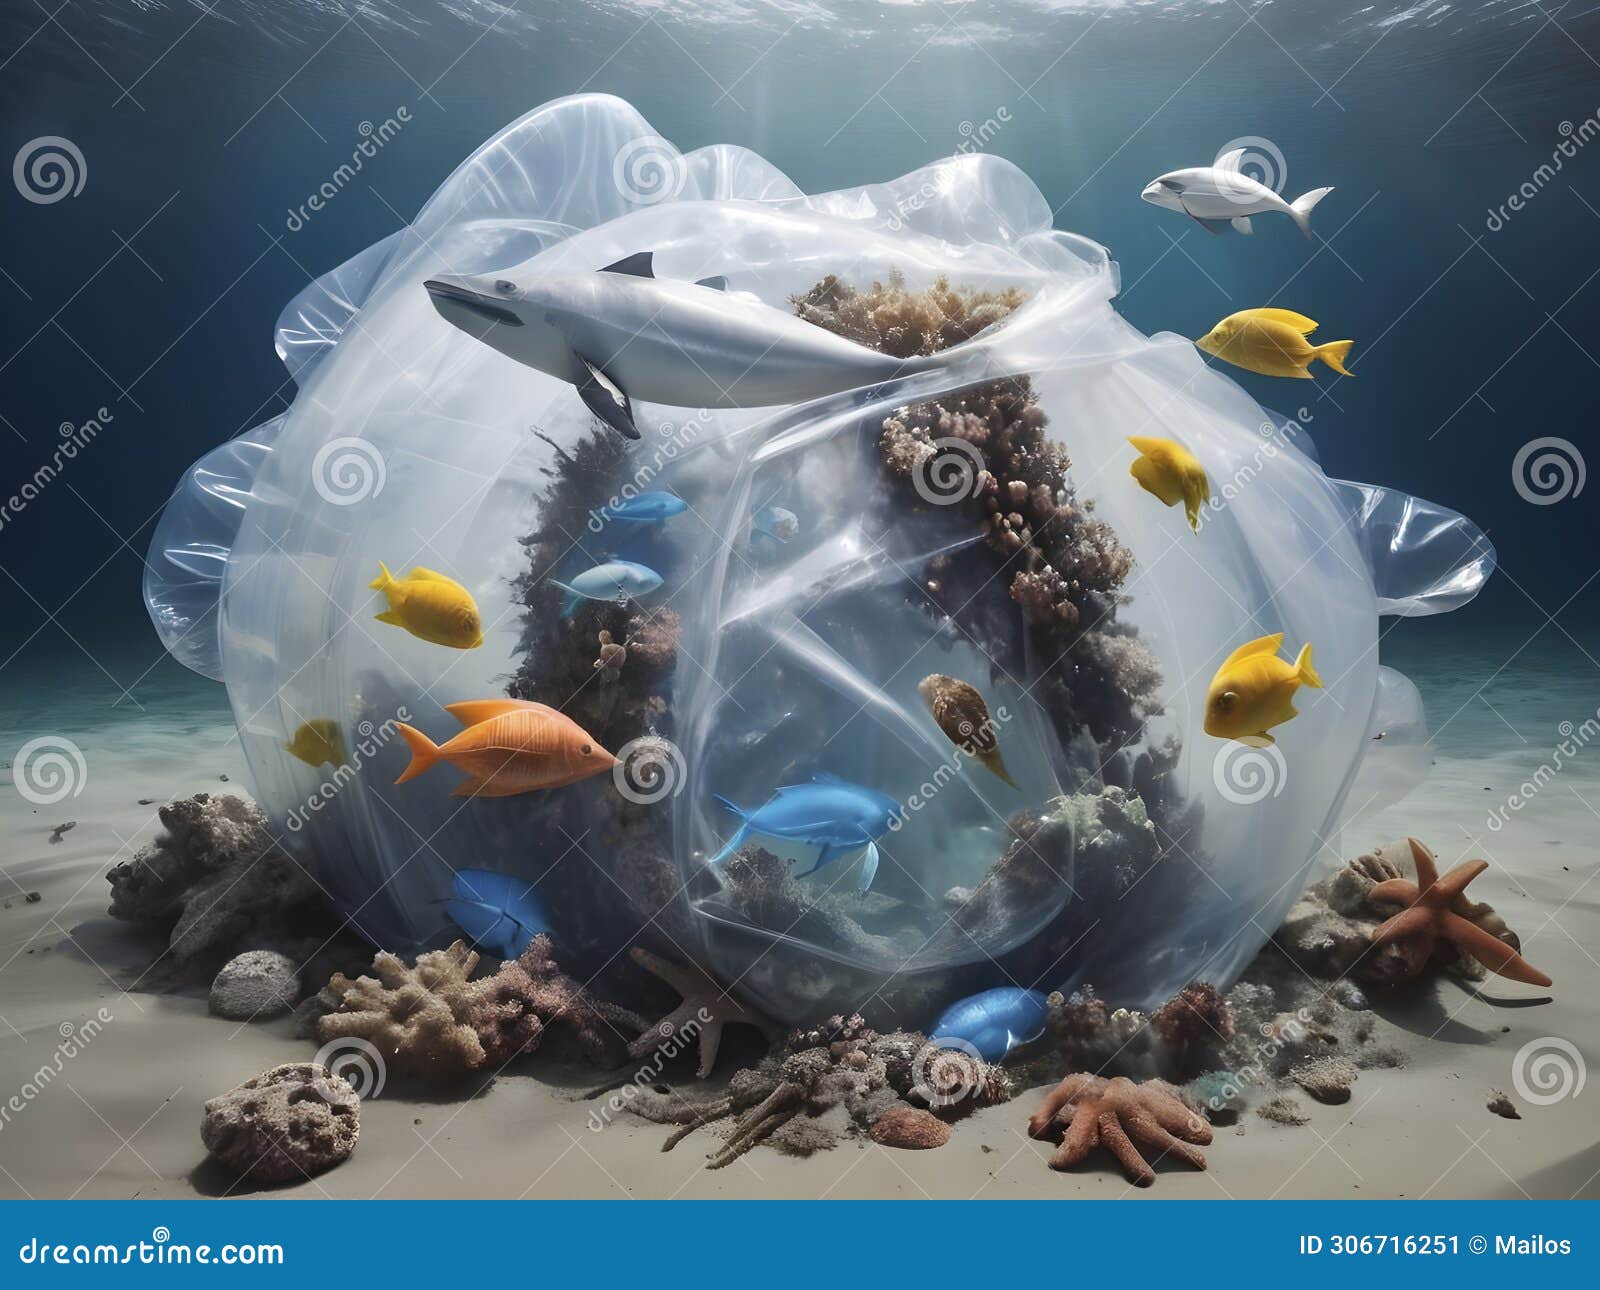 plastic peril. unveiling the tragedy of marine creatures ensnared